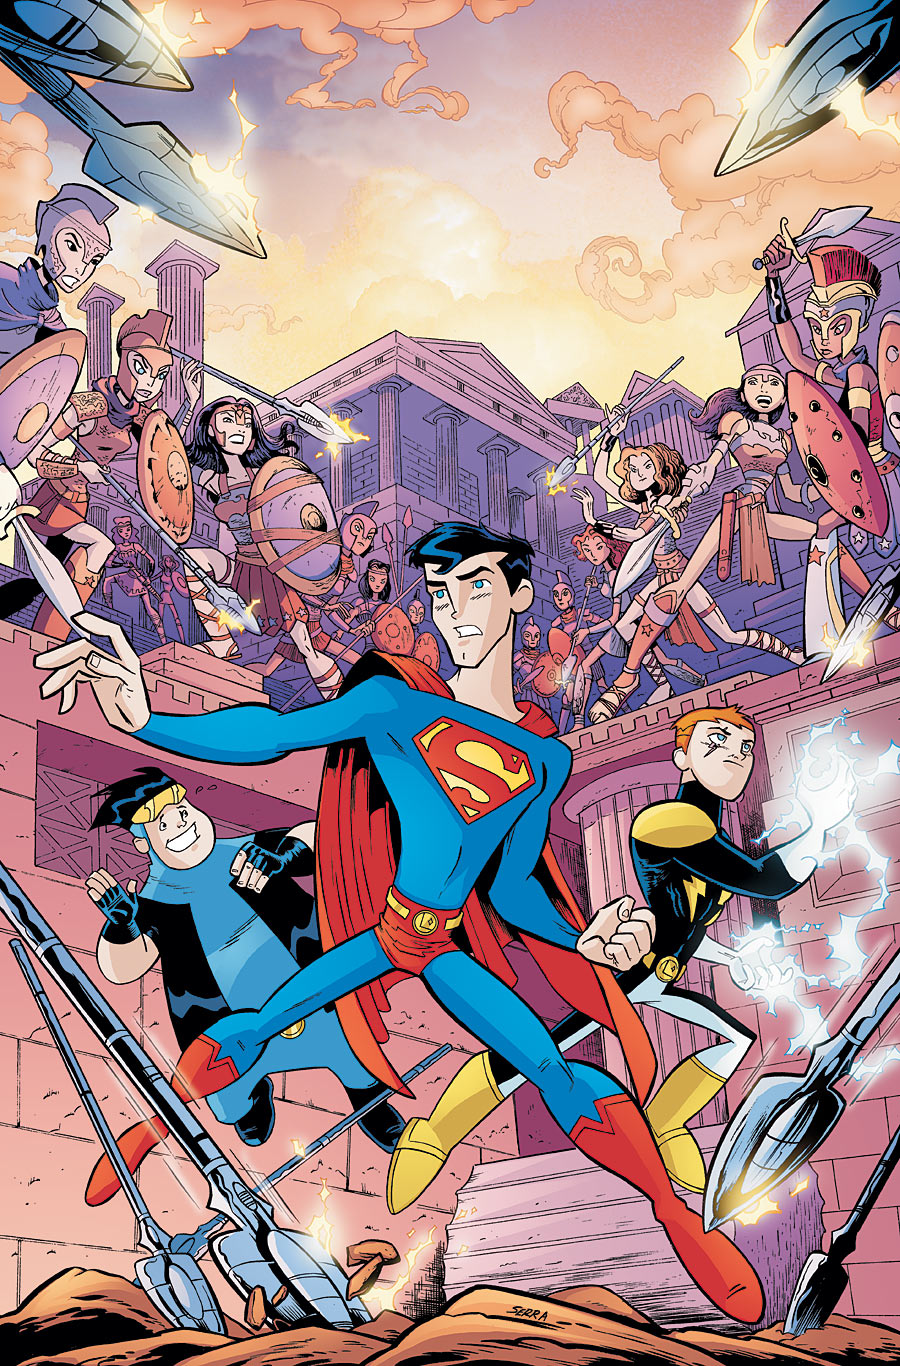 THE LEGION OF SUPER-HEROES IN THE 31st CENTURY #7